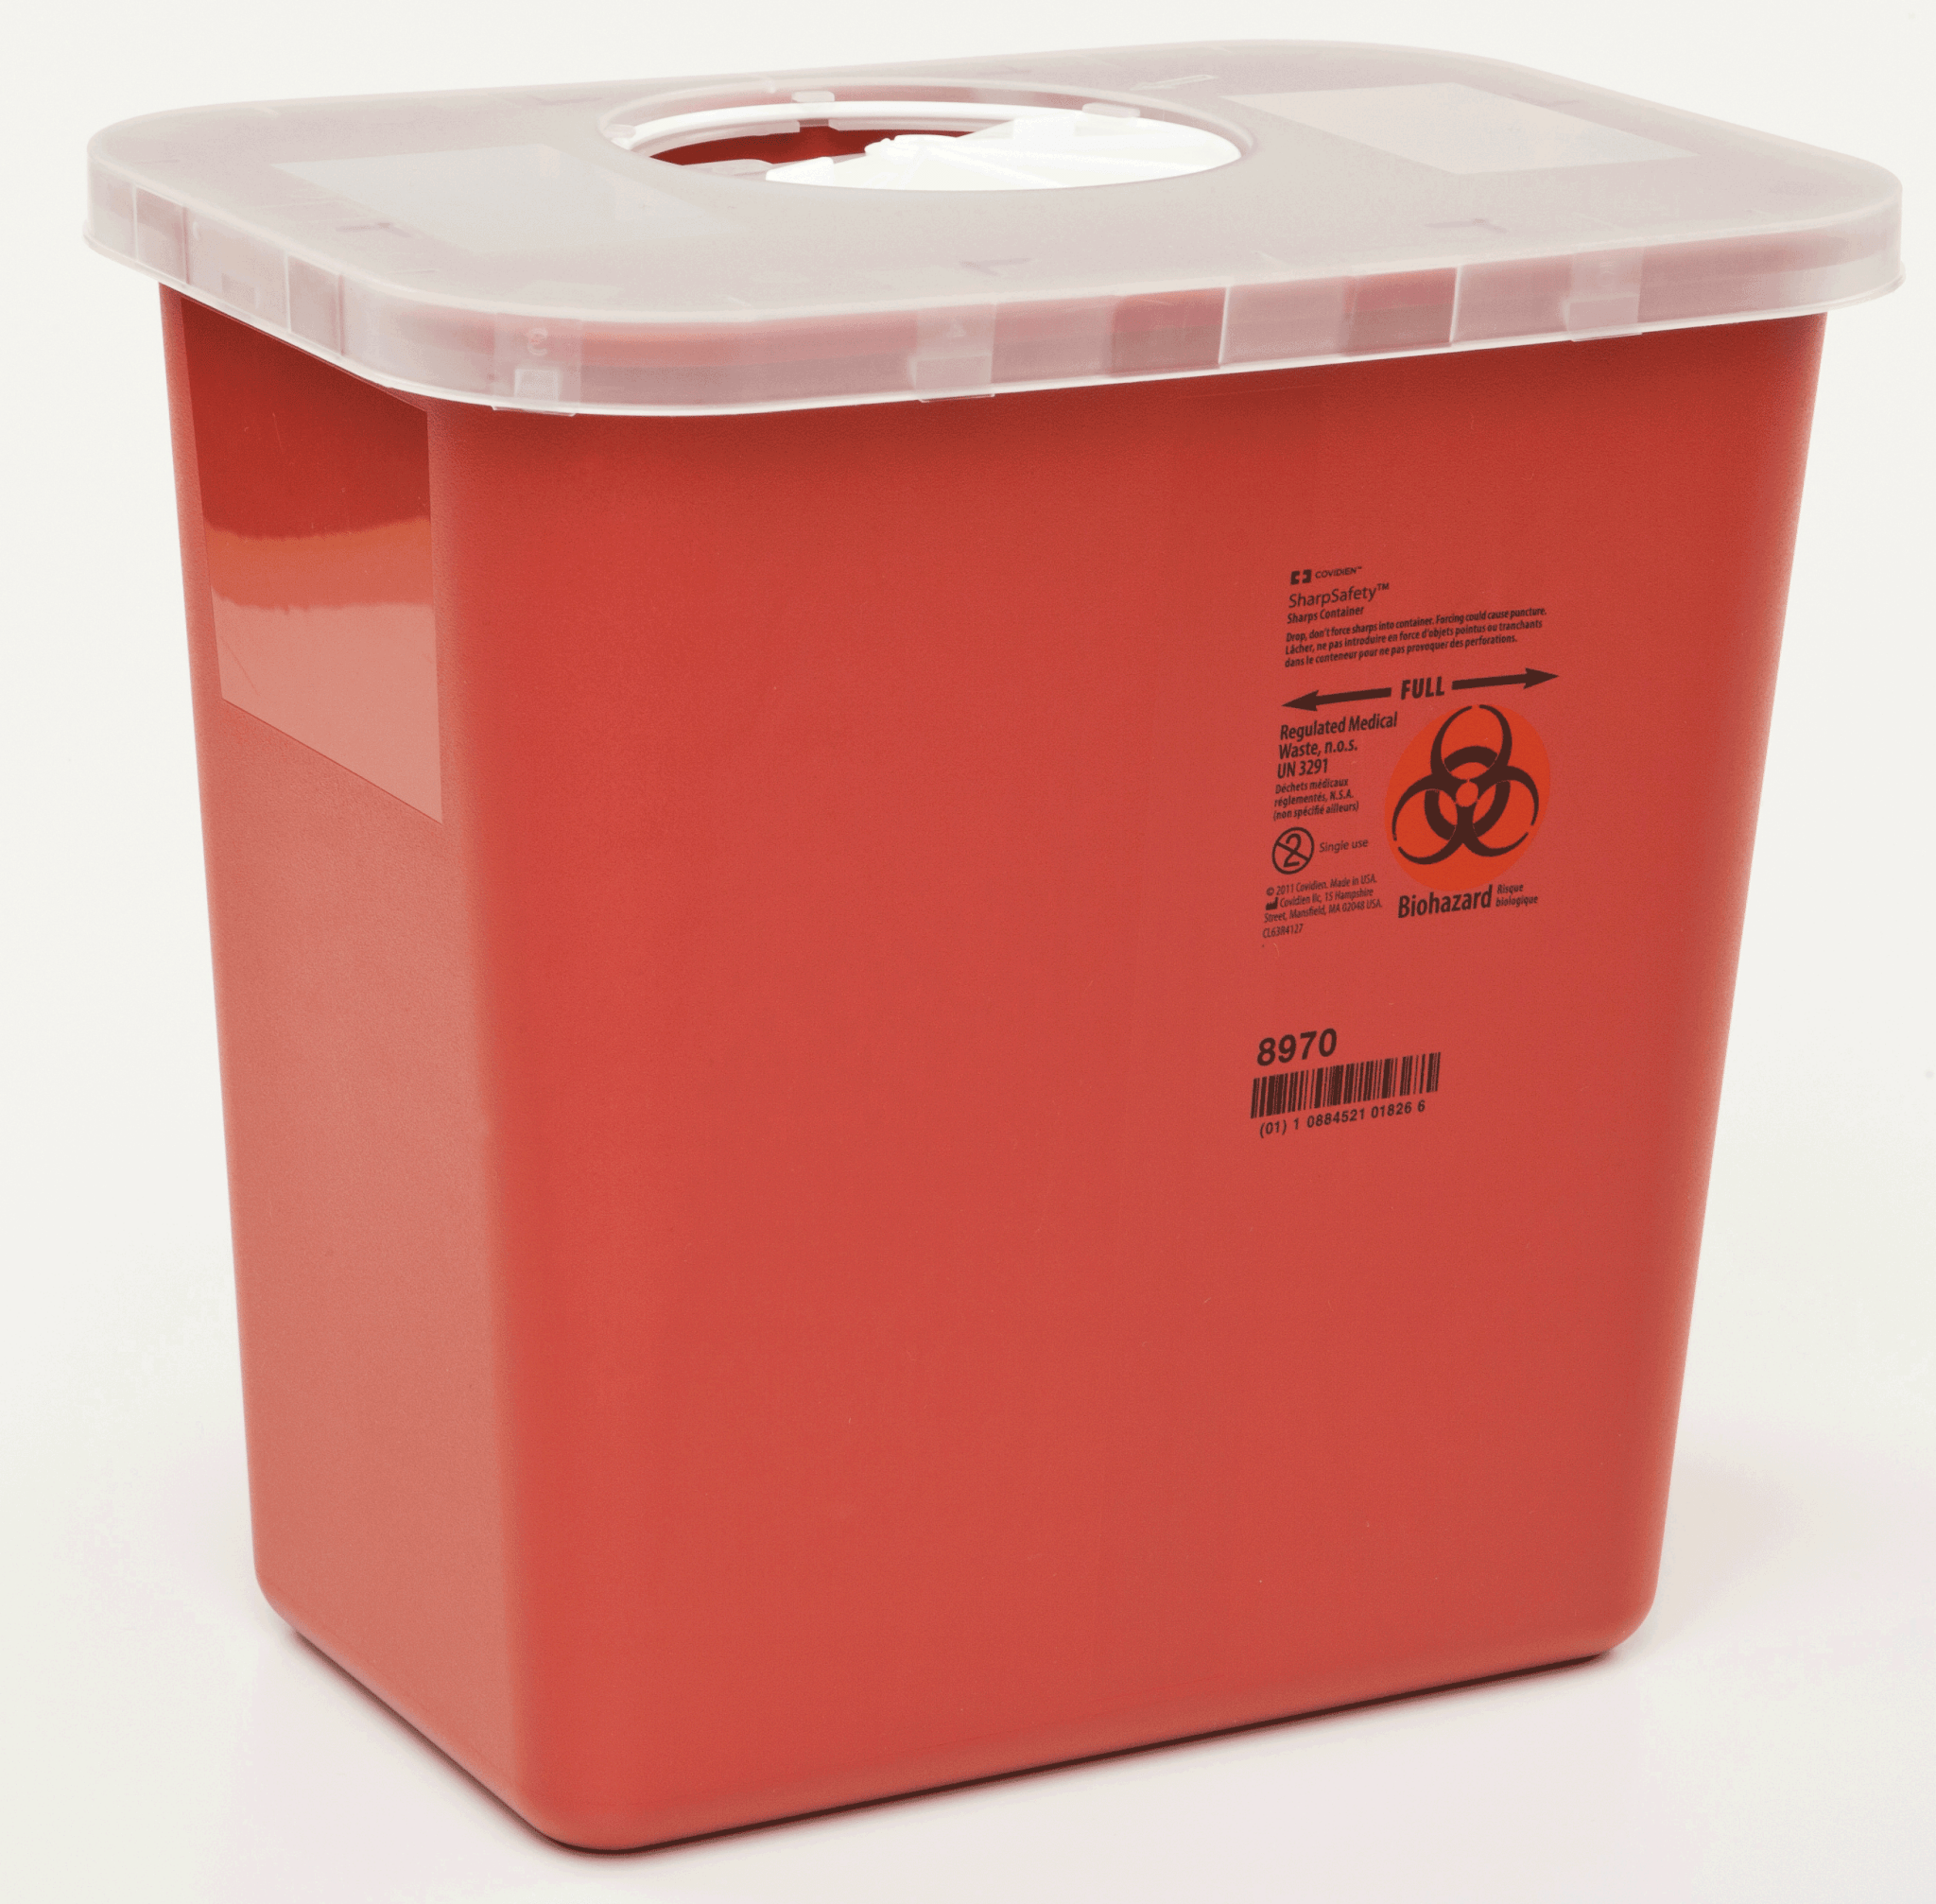 EA/1 - Kendall Healthcare Multi-Purpose Sharps Container with Rotor Lid 2 gal, 8 qt, Red, 10" H x 7-1/4" D x 10-1/2" W - Best Buy Medical Supplies